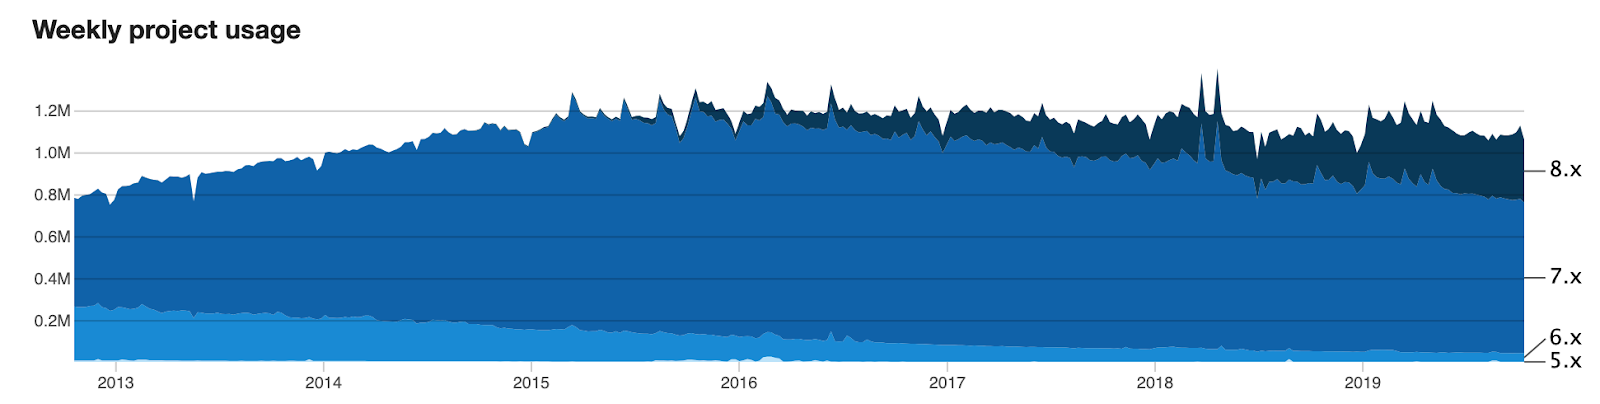 weekly project usage drupal